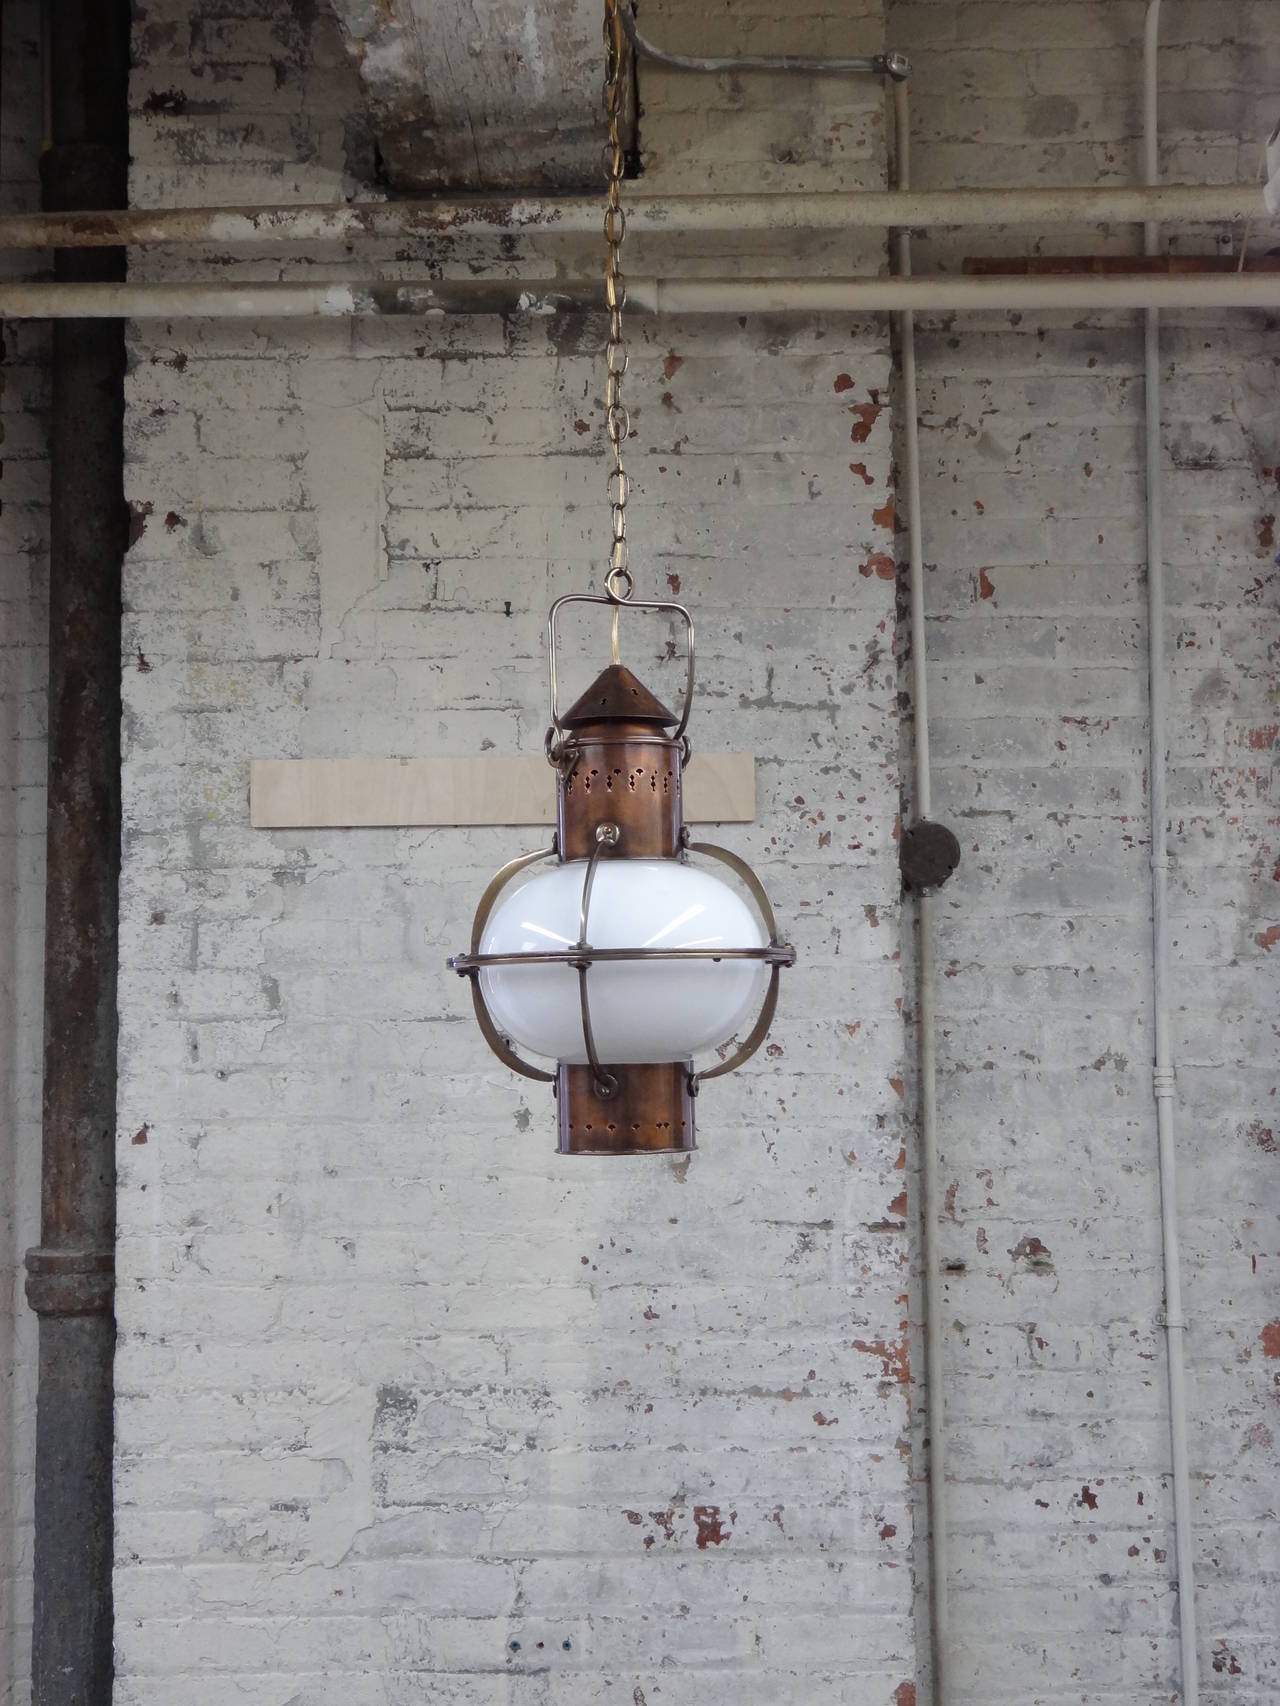 An English Arts & Crafts style hanging lantern executed in brass and copper with a milk glass shade. Unwired. Chain and canopy not included. Four lanterns available.